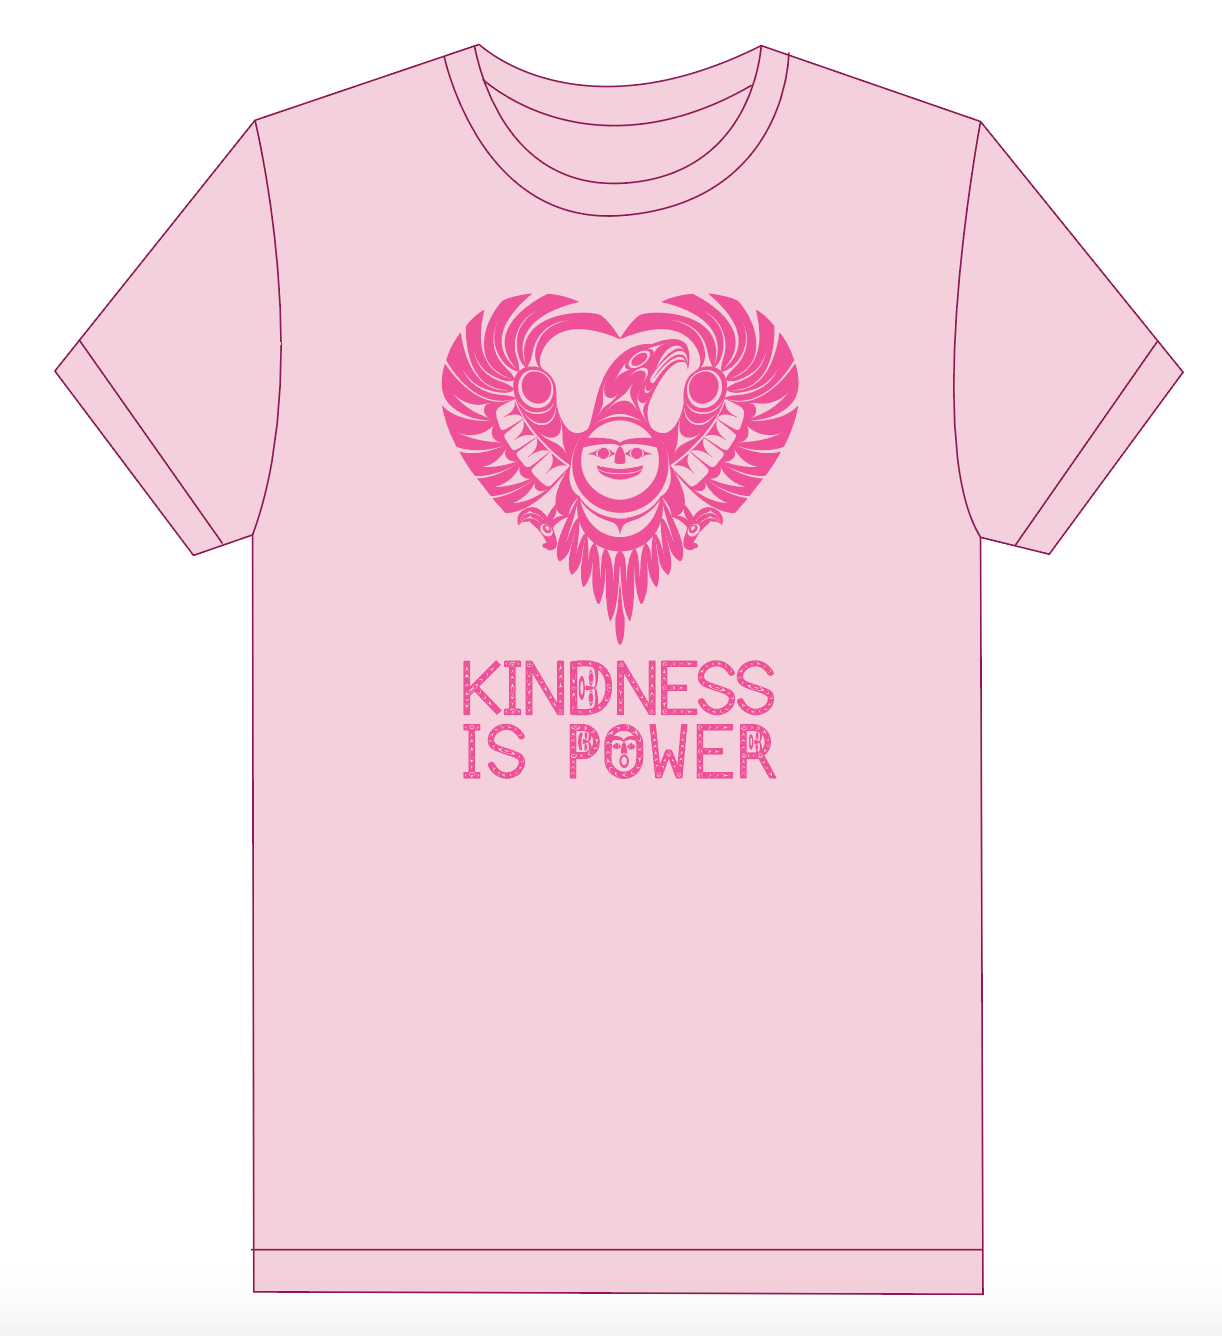 T Shirt Pink Anti Bullying Kindness Is Power - XXL -  - House of Himwitsa Native Art Gallery and Gifts